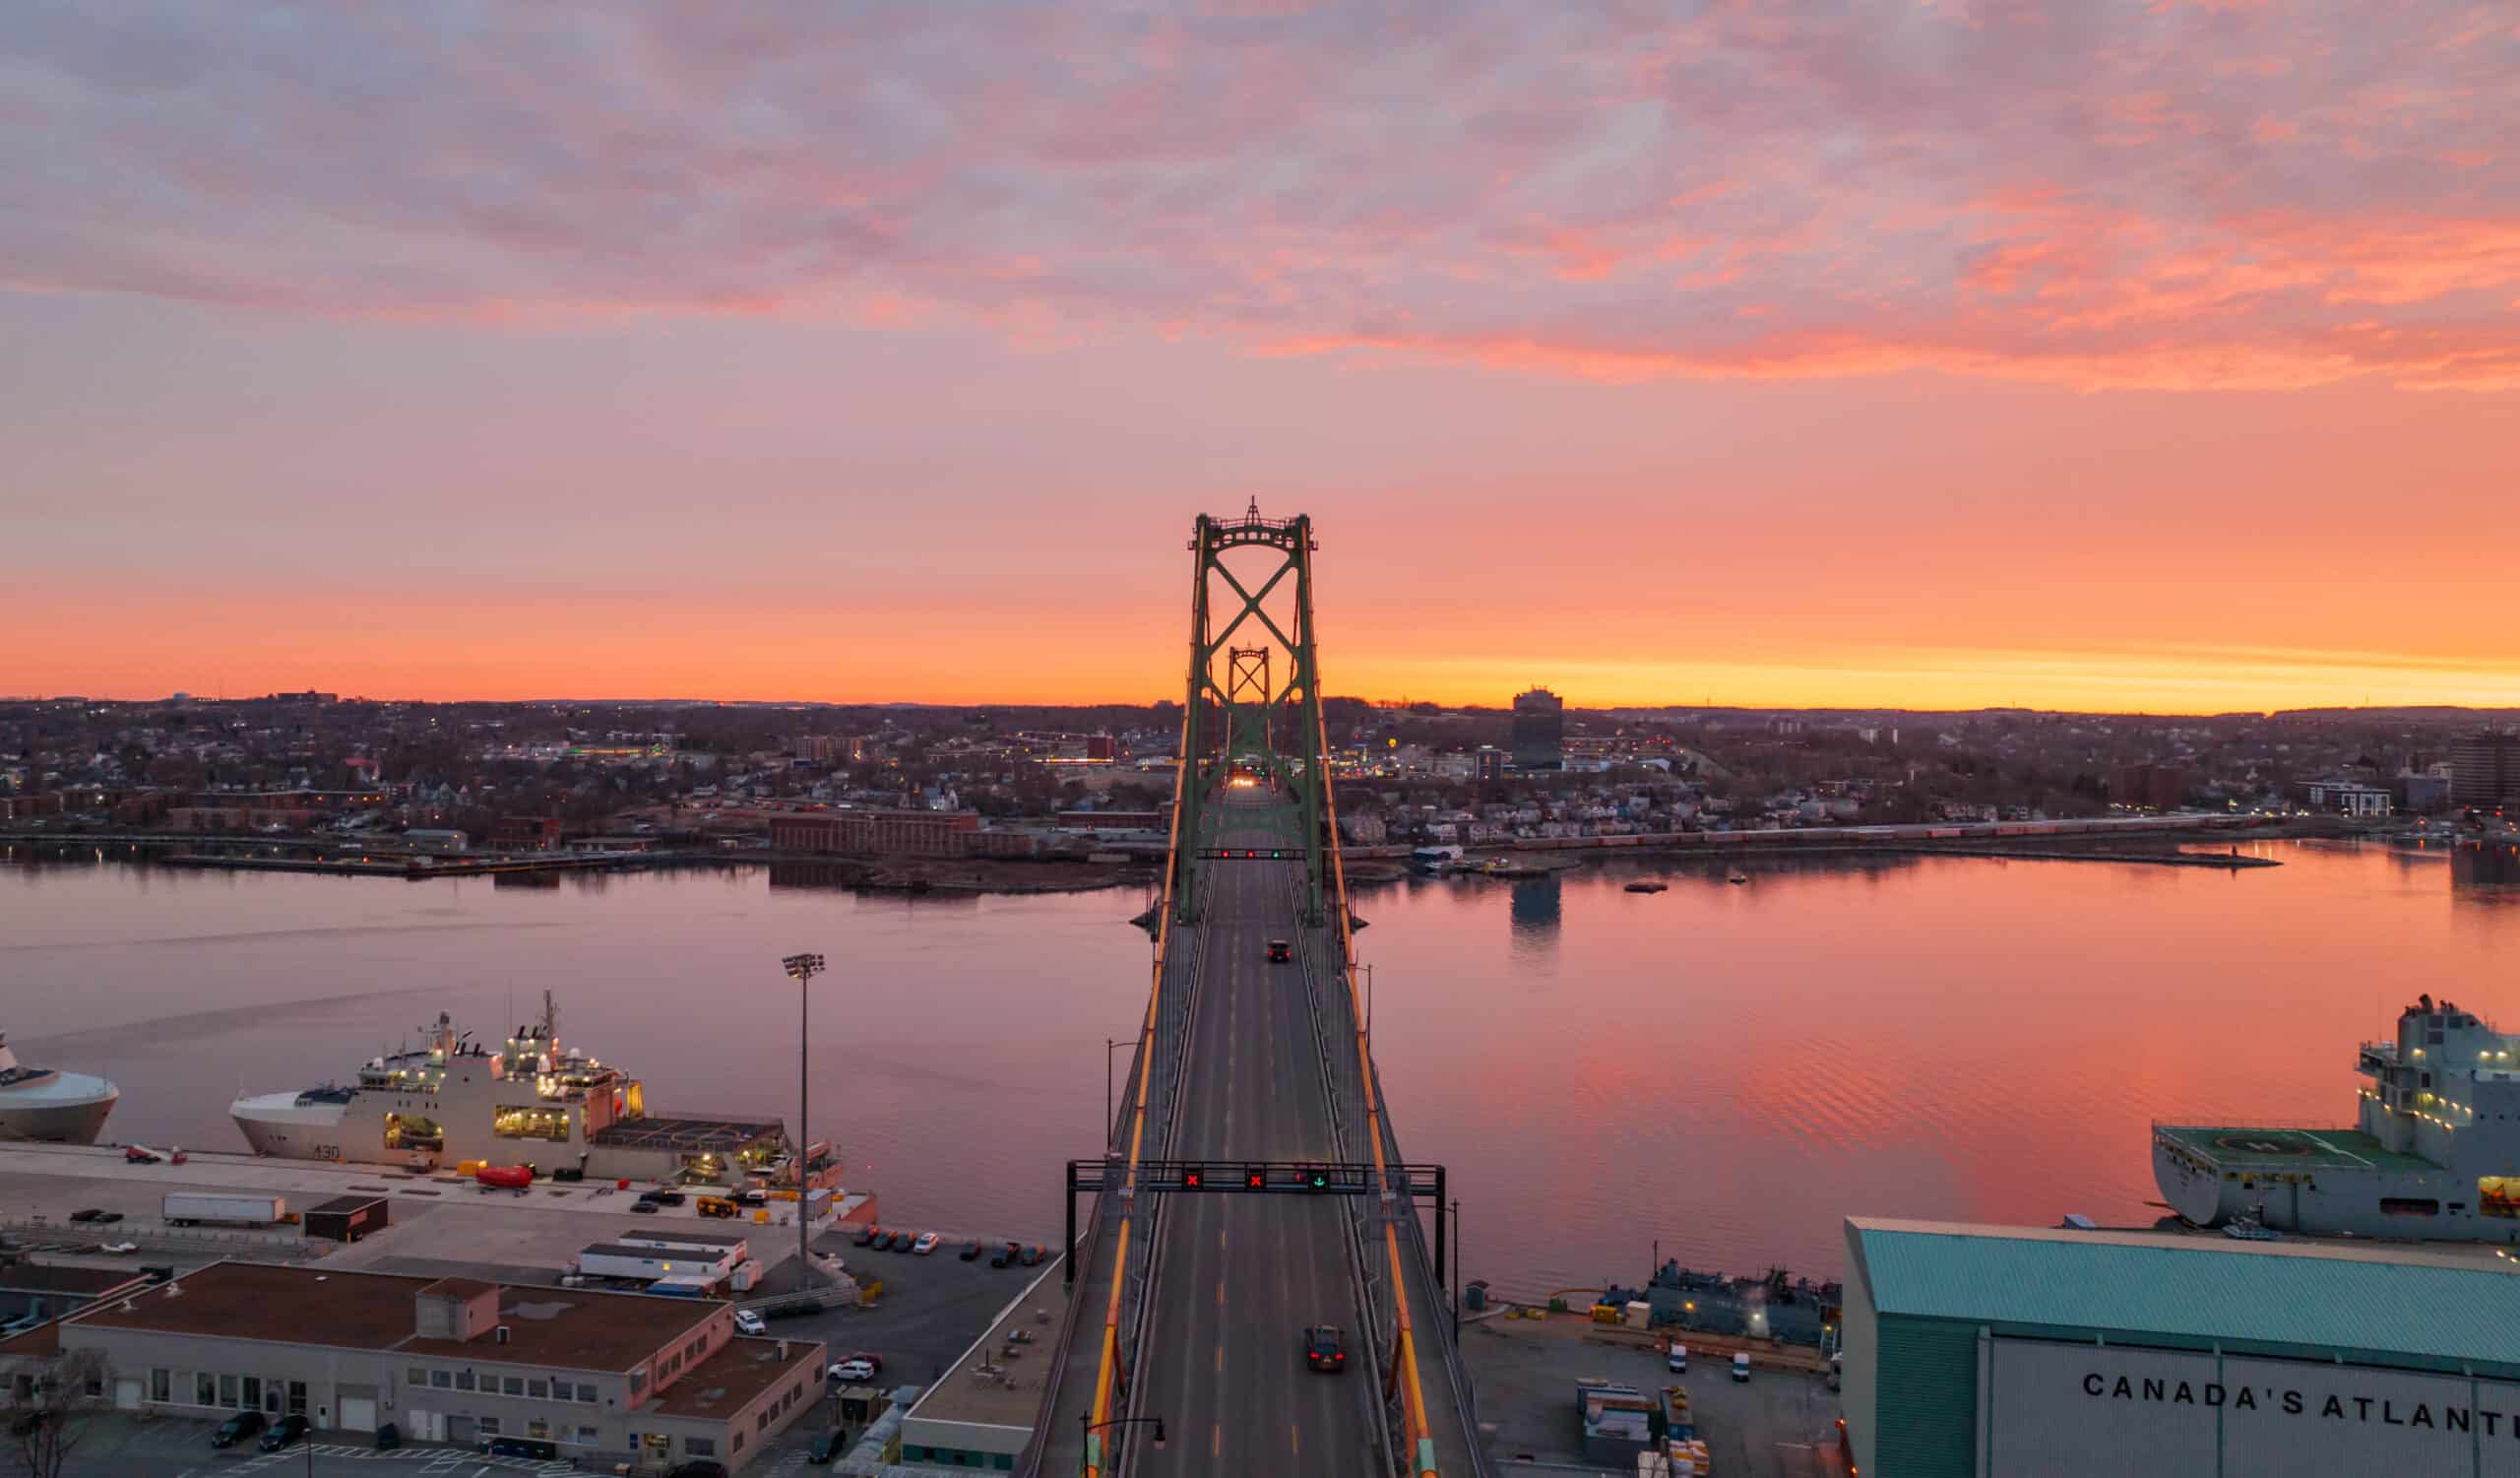 The Macdonald Bridge, with Dartmouth in the background, is seen at sunset.